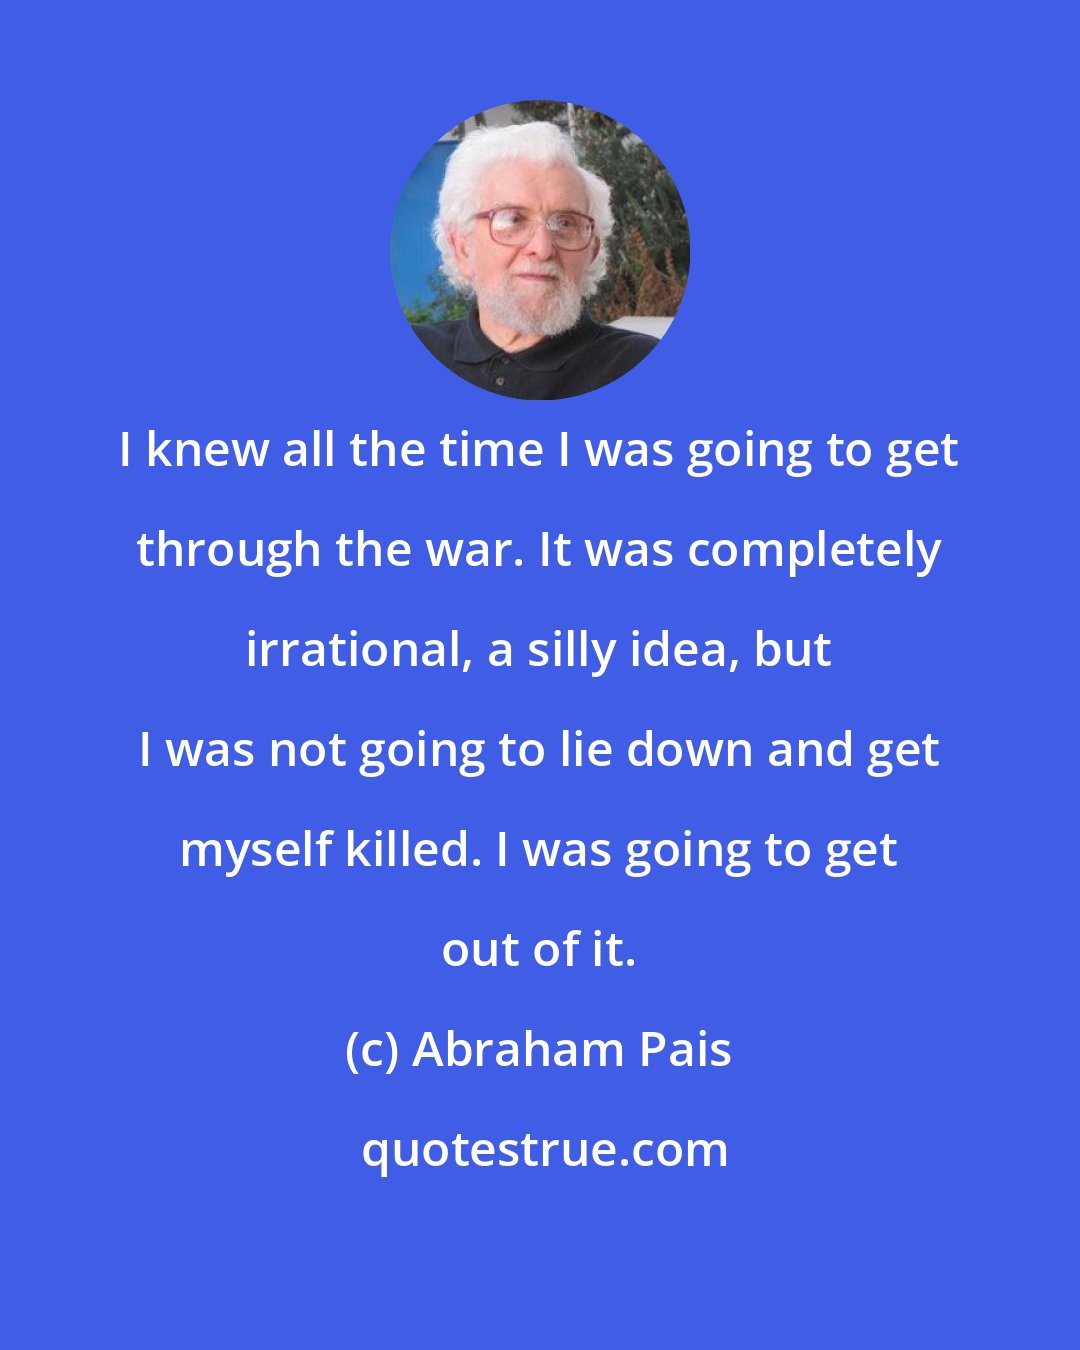 Abraham Pais: I knew all the time I was going to get through the war. It was completely irrational, a silly idea, but I was not going to lie down and get myself killed. I was going to get out of it.